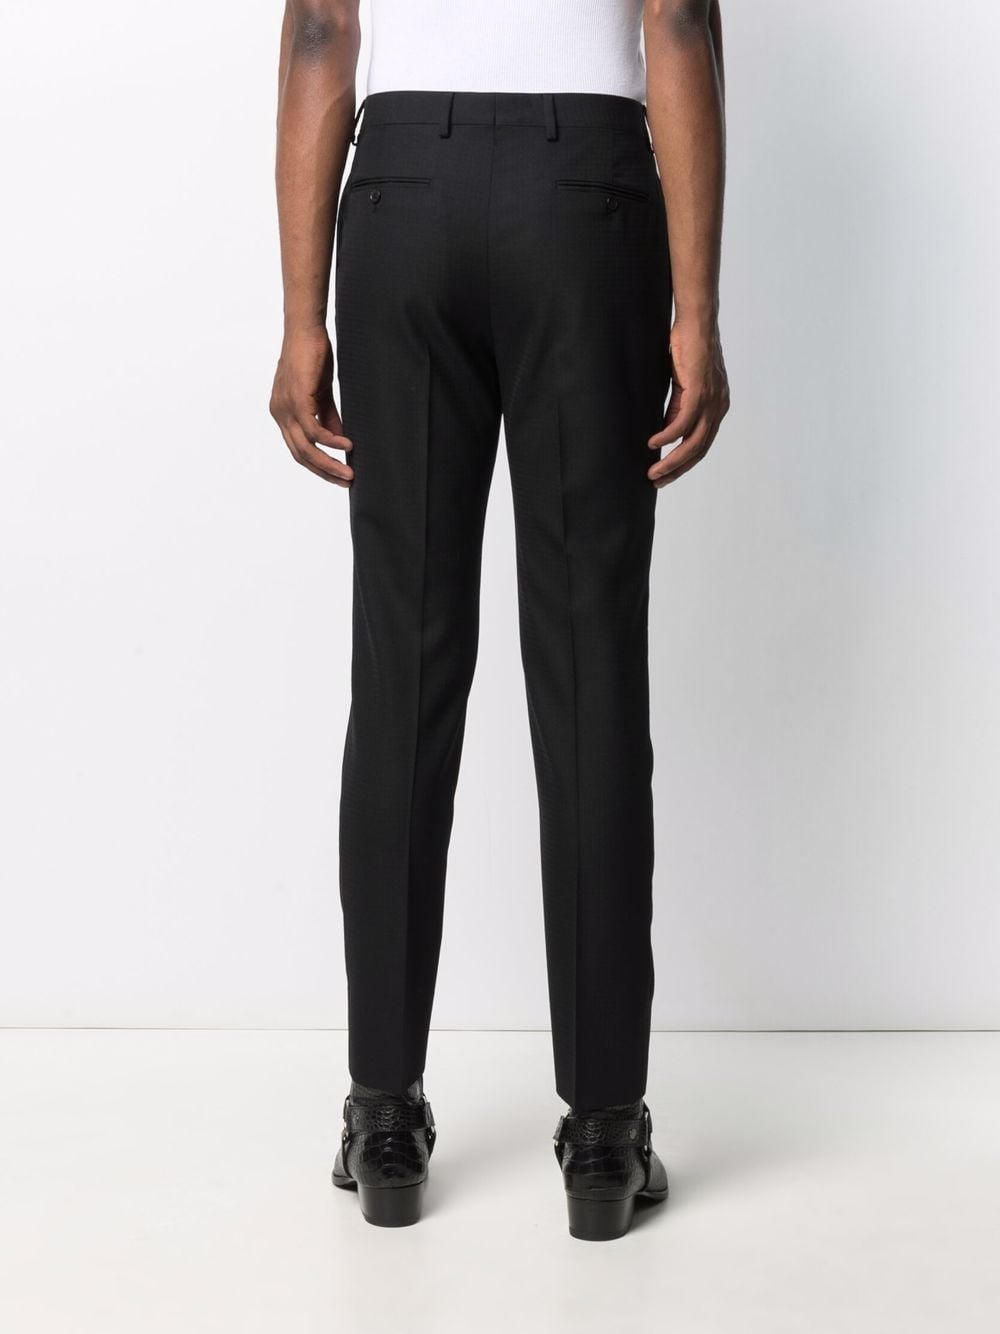 Saint Laurent pressed-crease Tailored Trousers - Farfetch